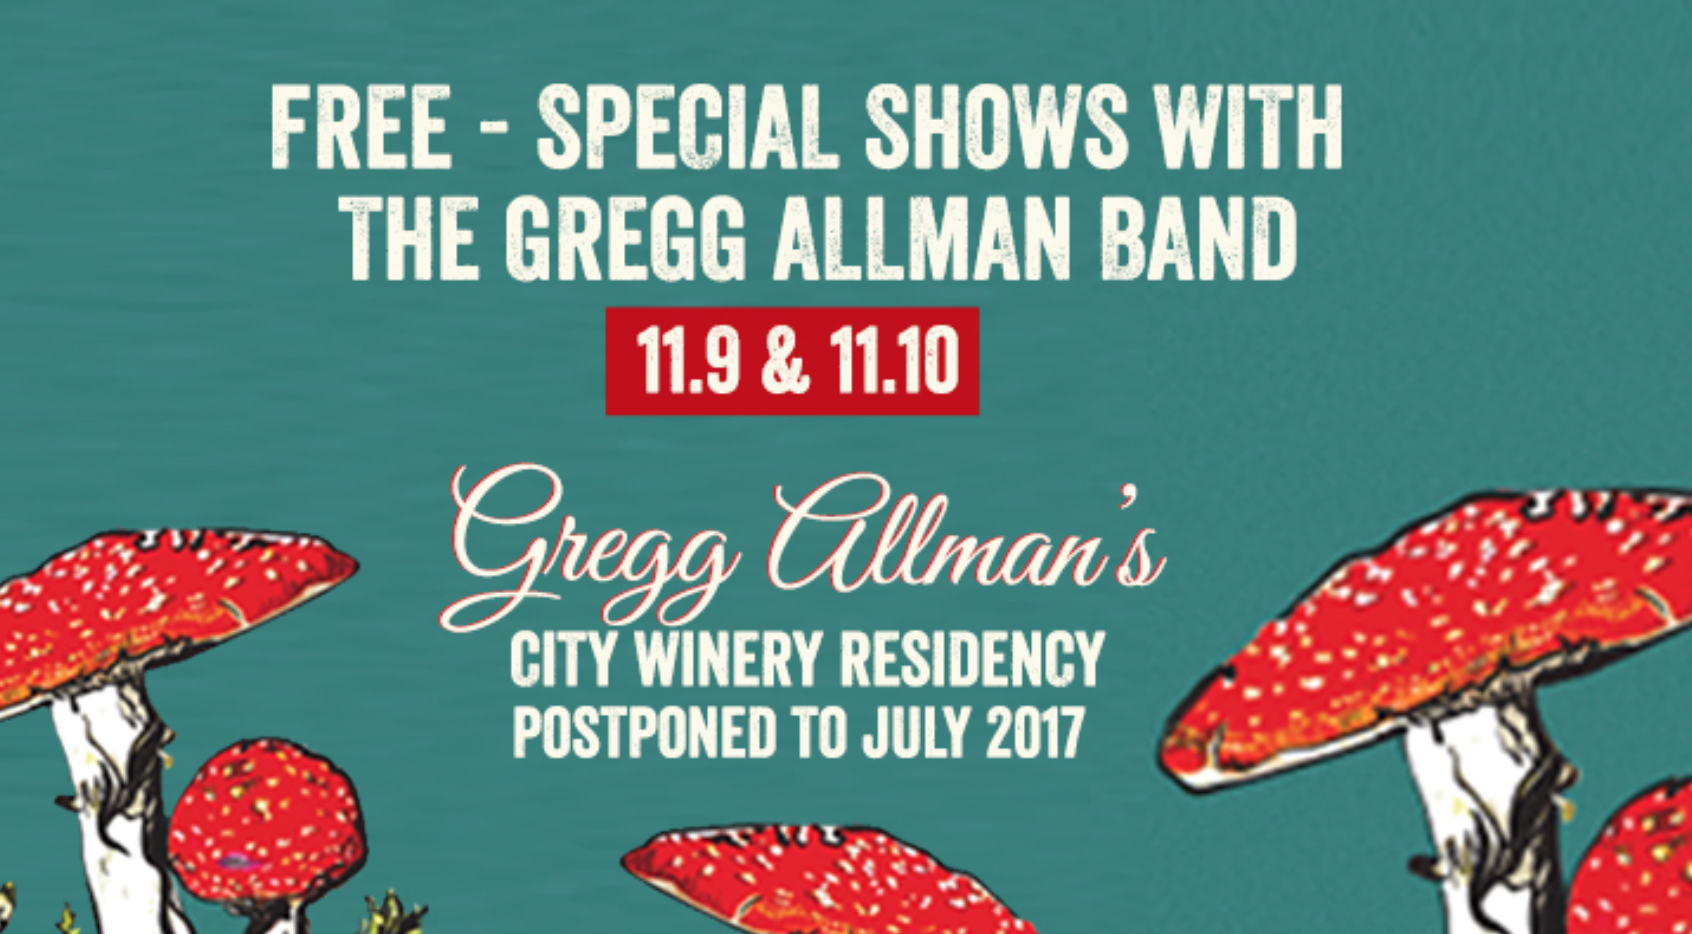 The announcement via City Winery's New York site